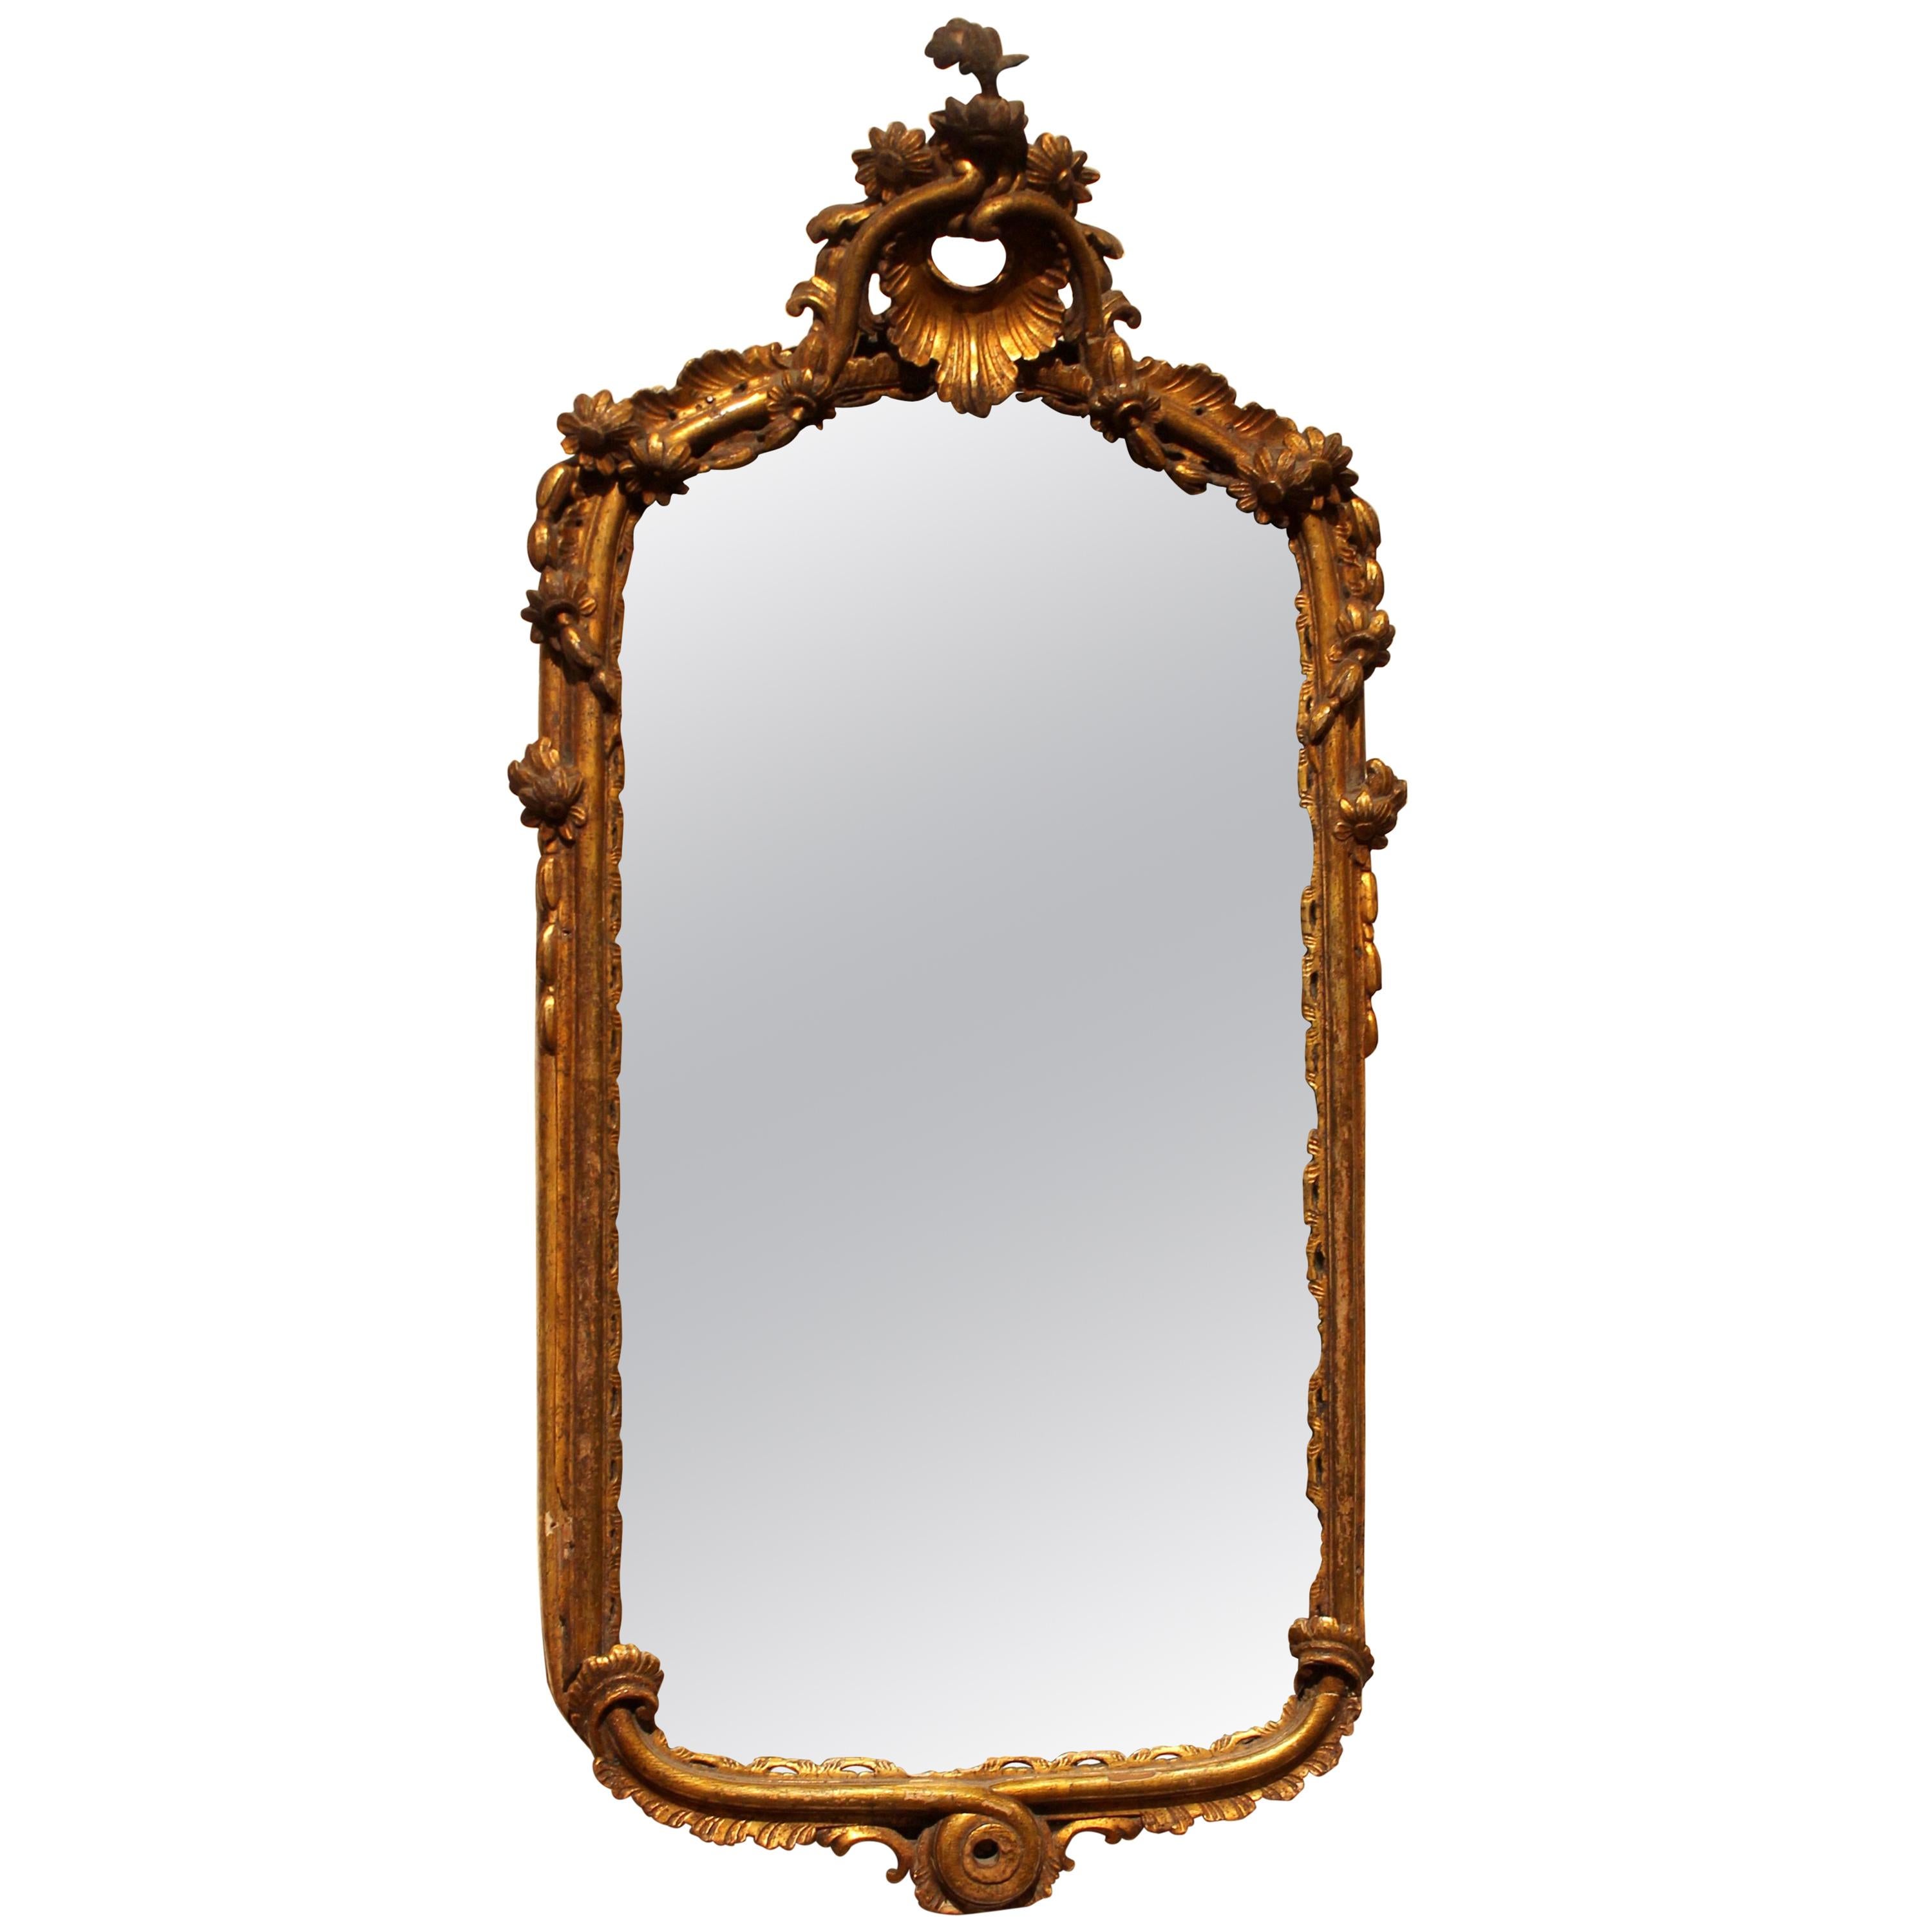 Italian Louis XV Period Hand-Carved Giltwood Mirror